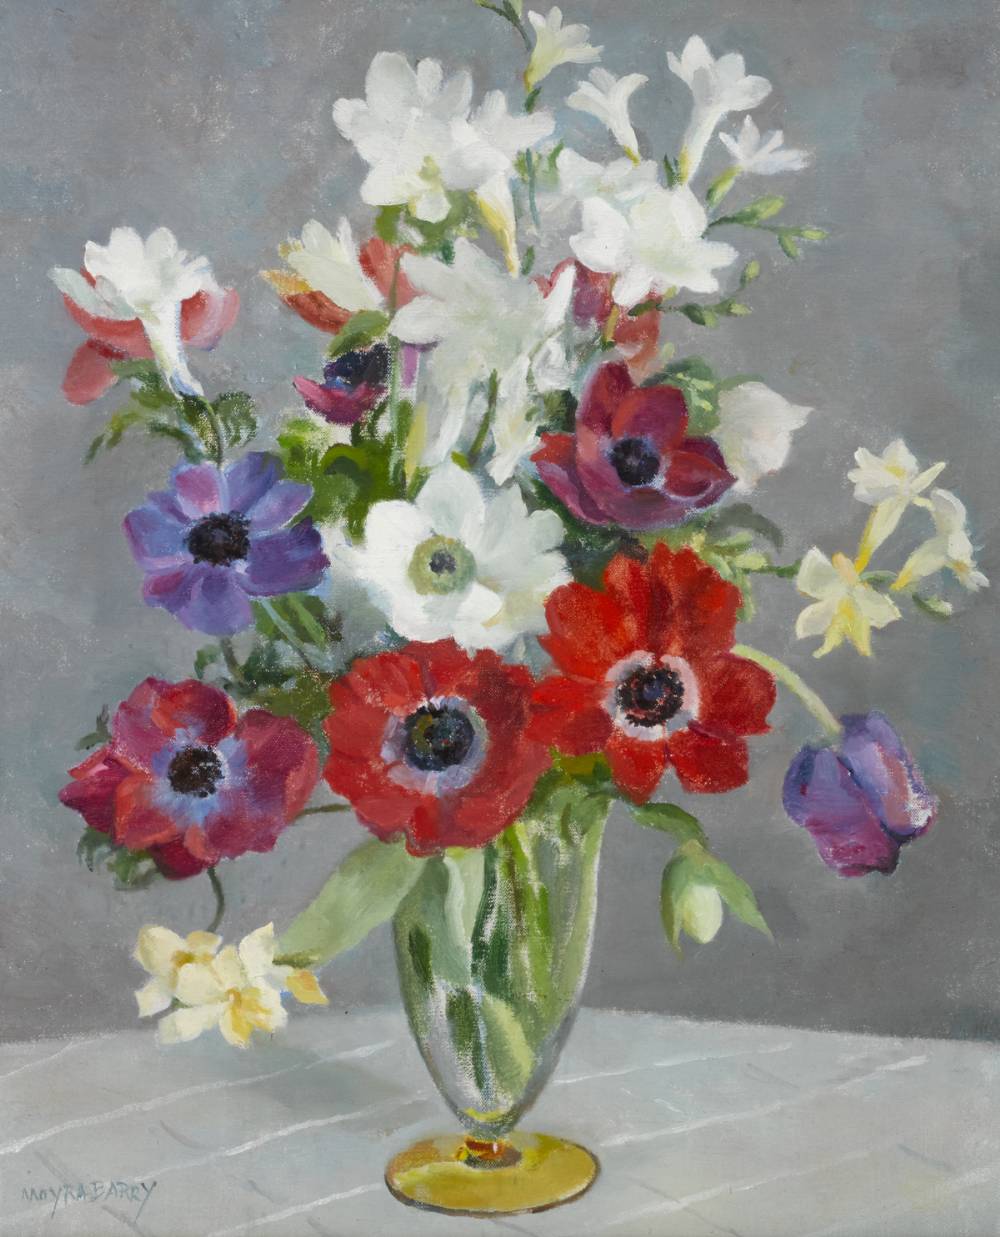 STILL LIFE WITH POPPIES by Moyra Barry (1885-1960) (1885-1960) at Whyte's Auctions